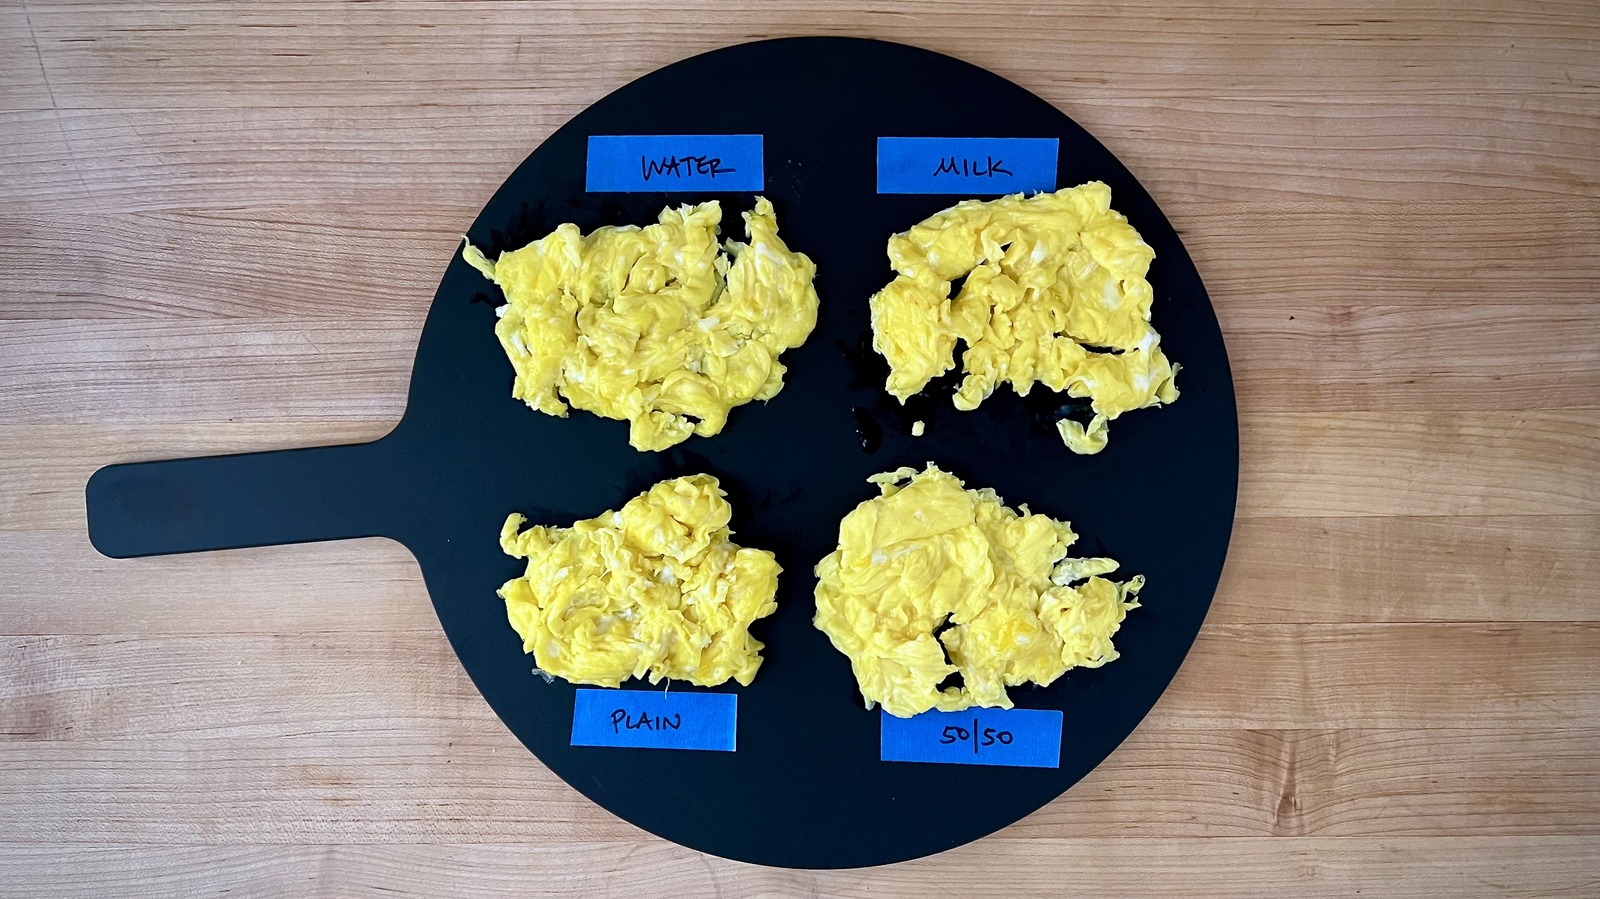 https://www.tastingtable.com/img/gallery/water-vs-milk-which-is-the-better-addition-to-scrambled-eggs/l-intro-1677601089.jpg